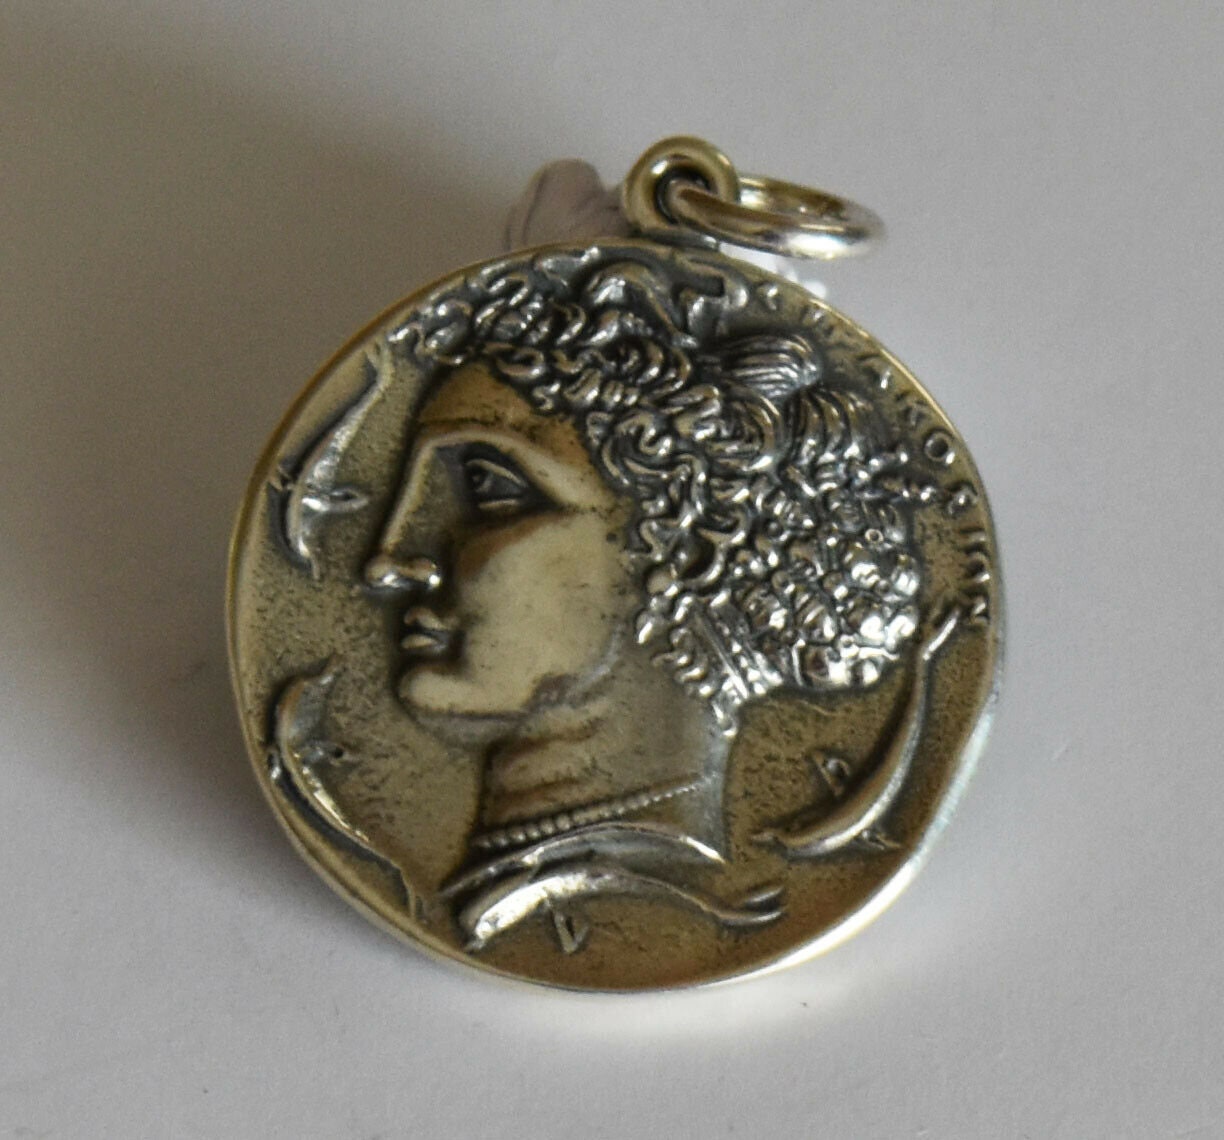 Artemis Diana - Greek Roman Goddess of the Hunt, the Wilderness, Wild Animals, the Moon, and Chastity - Coin Pendant - 925 Sterling Silver